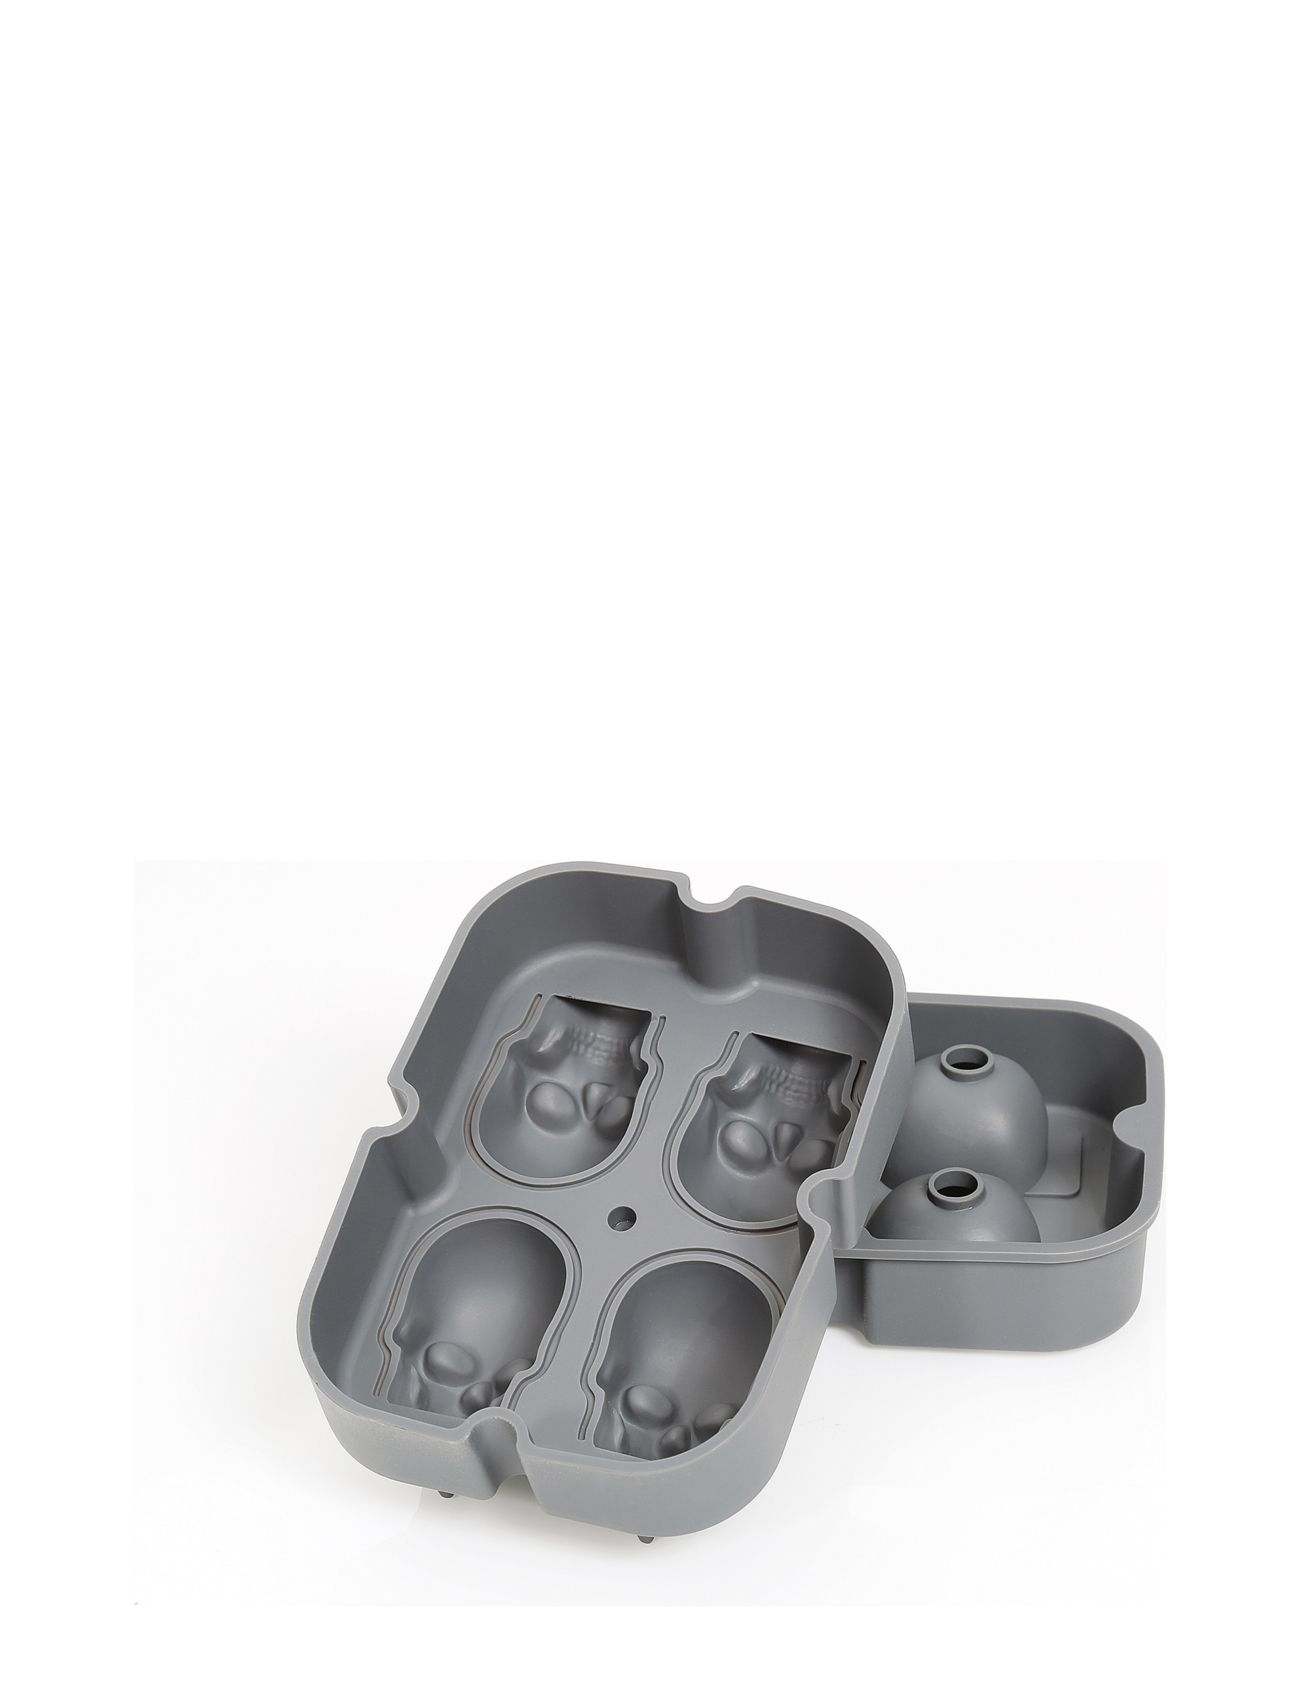 Isterning Kranie Form Home Tableware Dining & Table Accessories Ice Trays Grey Cilio